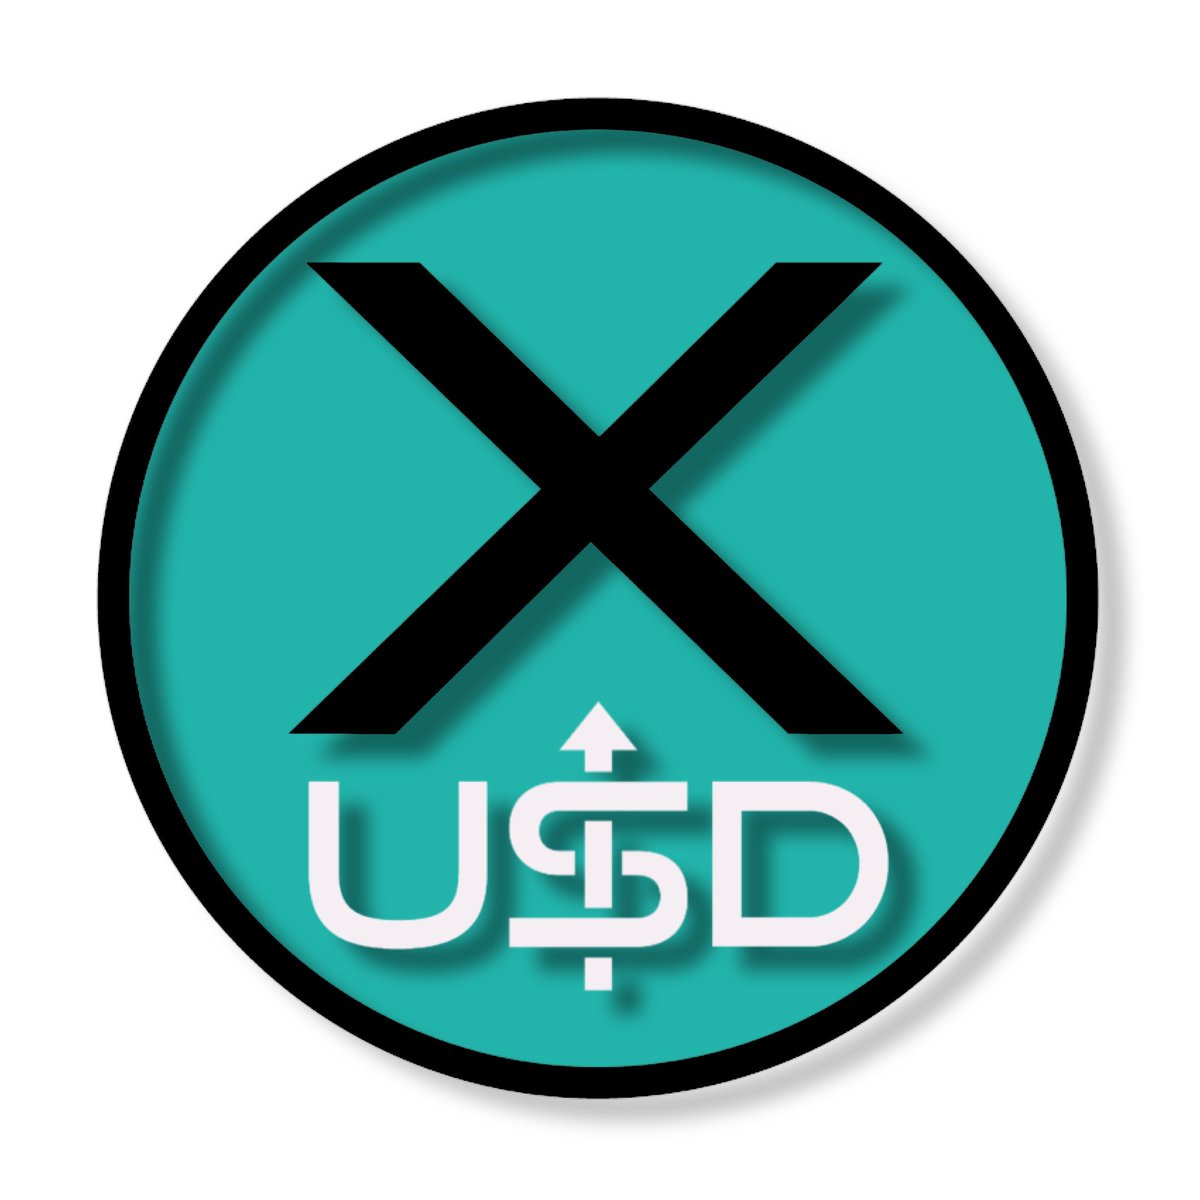 xUSD's price is 1.267502431750381277, which is up 26.750% since launch. #xUSD: #DeFi's best stablecoin staking protocol and collaborative token. #BuyTheRise